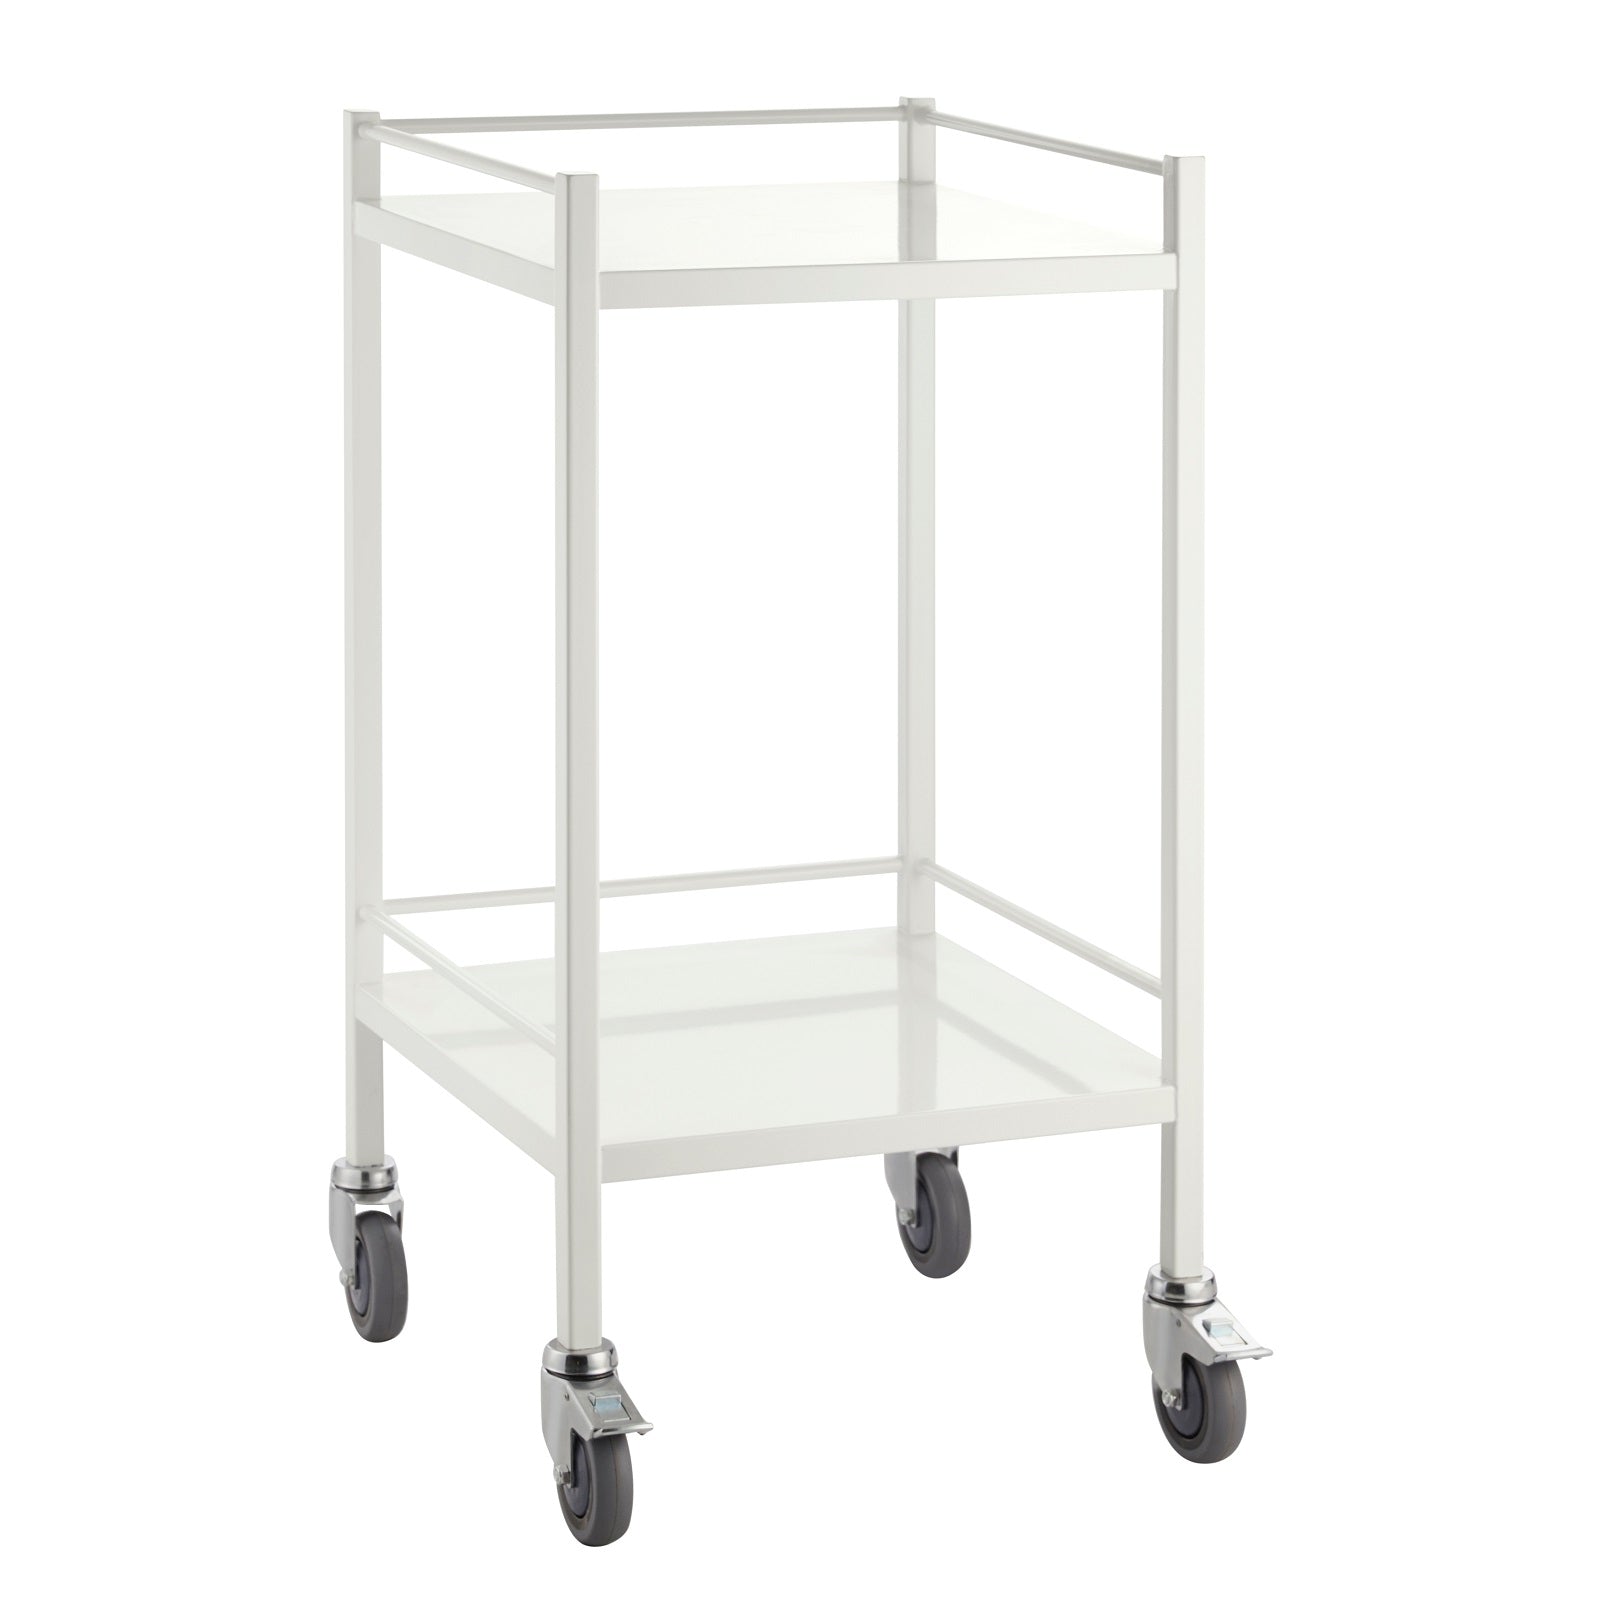 With smooth castors and an outstanding finish our no drawer powder coated trolley is a great alternative to stainless.